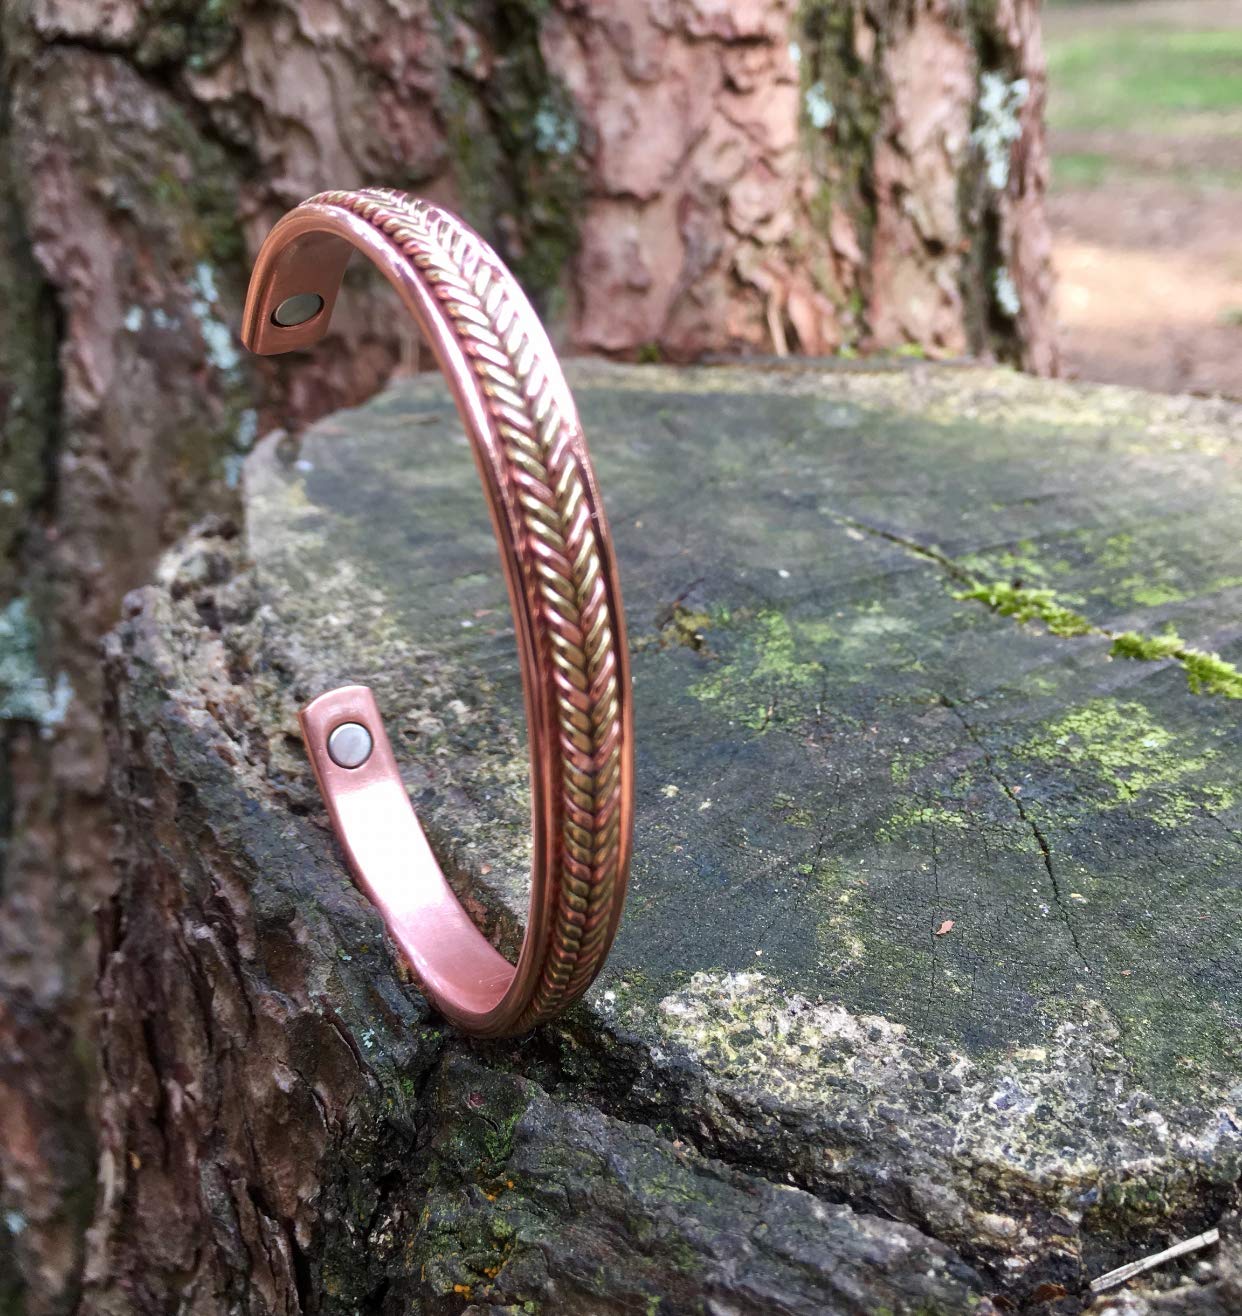 Pure Copper Magnetic Health Bangle - Traditional Twisted Rope Design - Arthritis Bracelet for Men &amp; Women - with Gift Box